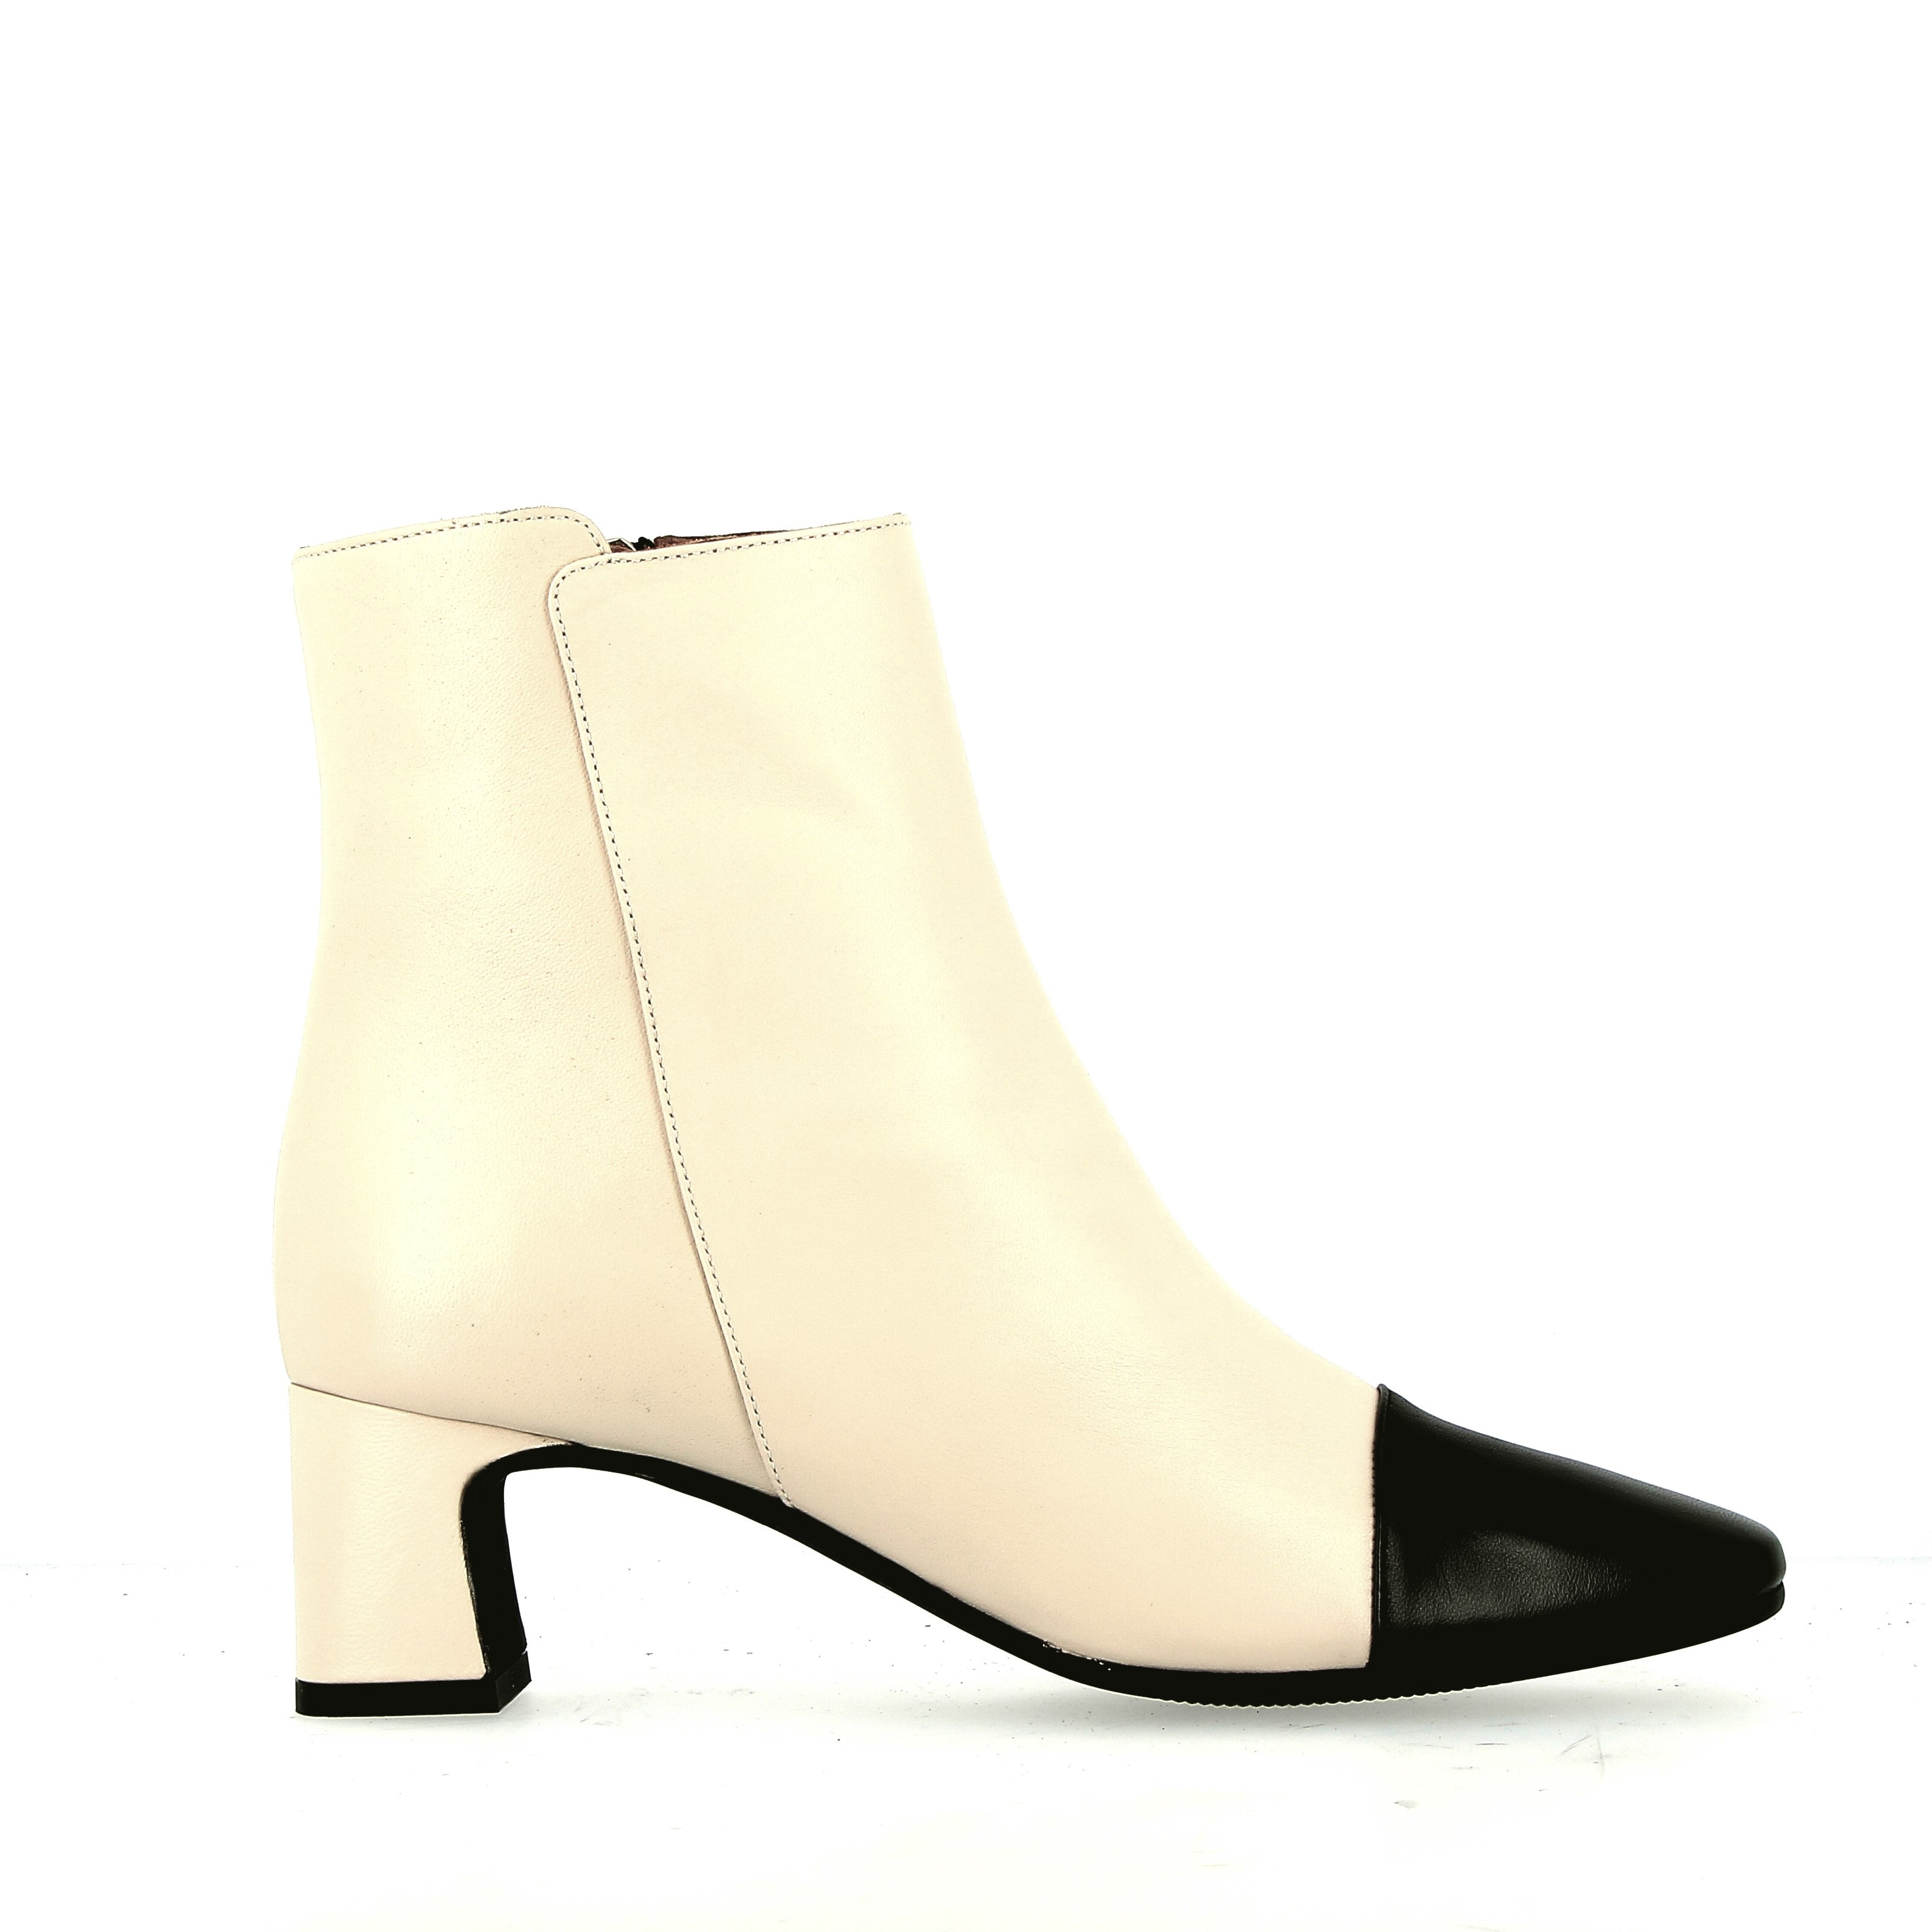 Ankle boot in two-tone nappa